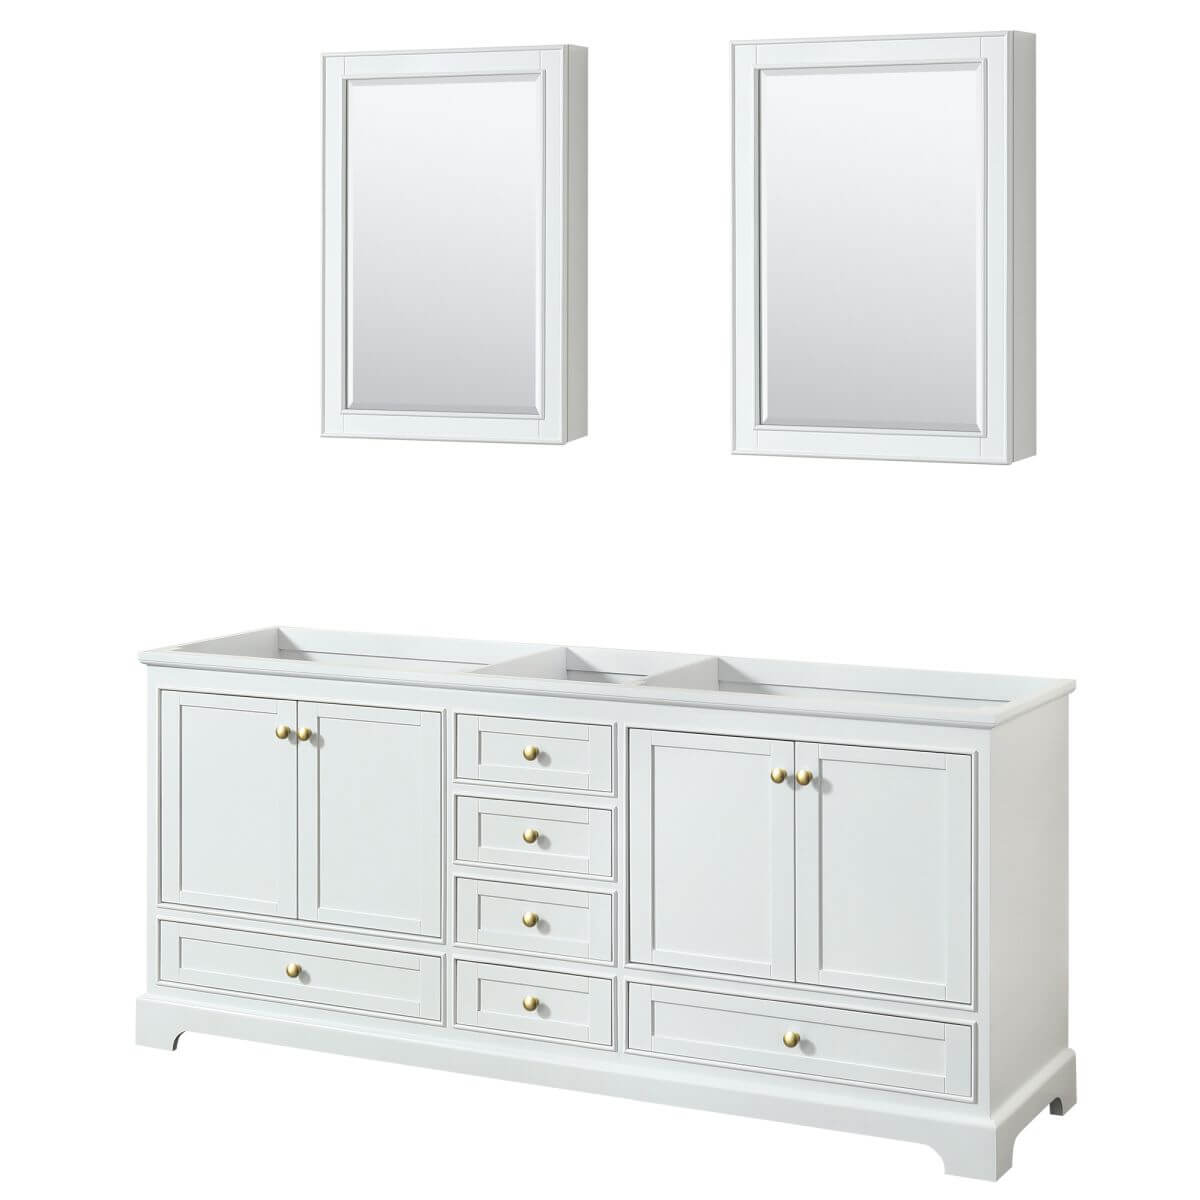 Wyndham Collection Deborah 80 inch Double Bathroom Vanity in White with Medicine Cabinets, Brushed Gold Trim, No Countertop and No Sinks - WCS202080DWGCXSXXMED